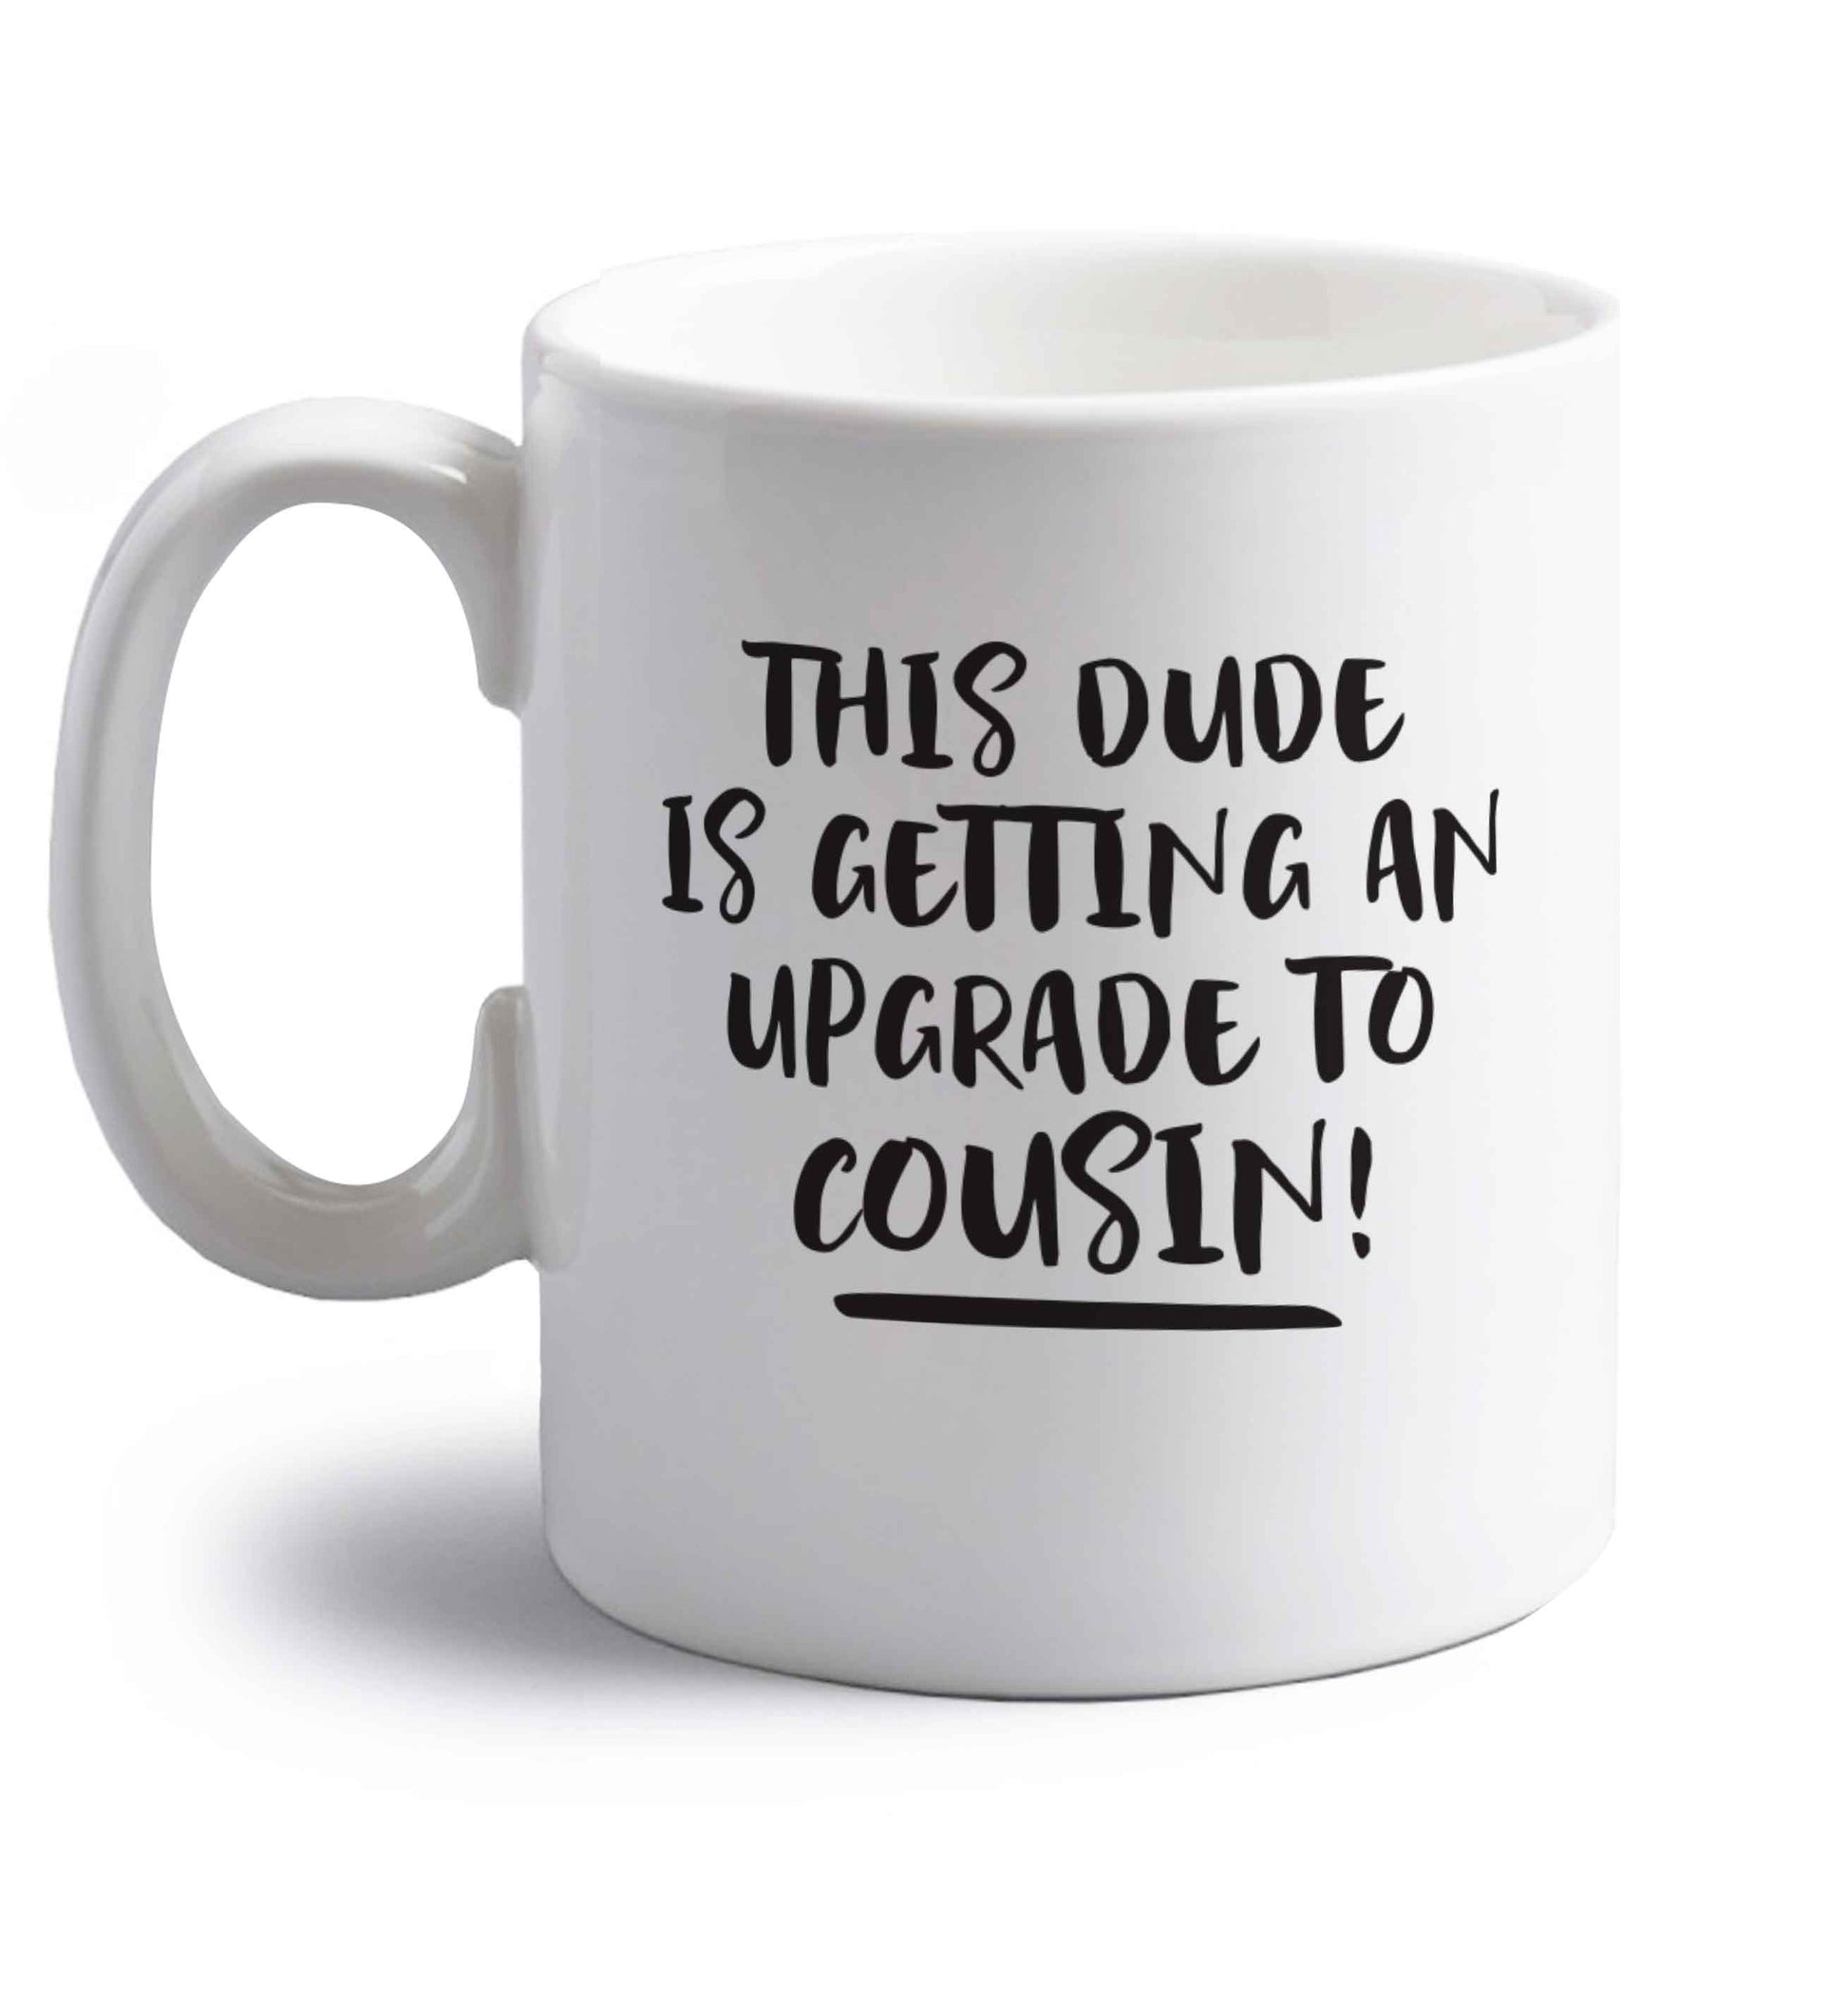 This dude is getting an upgrade to cousin! right handed white ceramic mug 